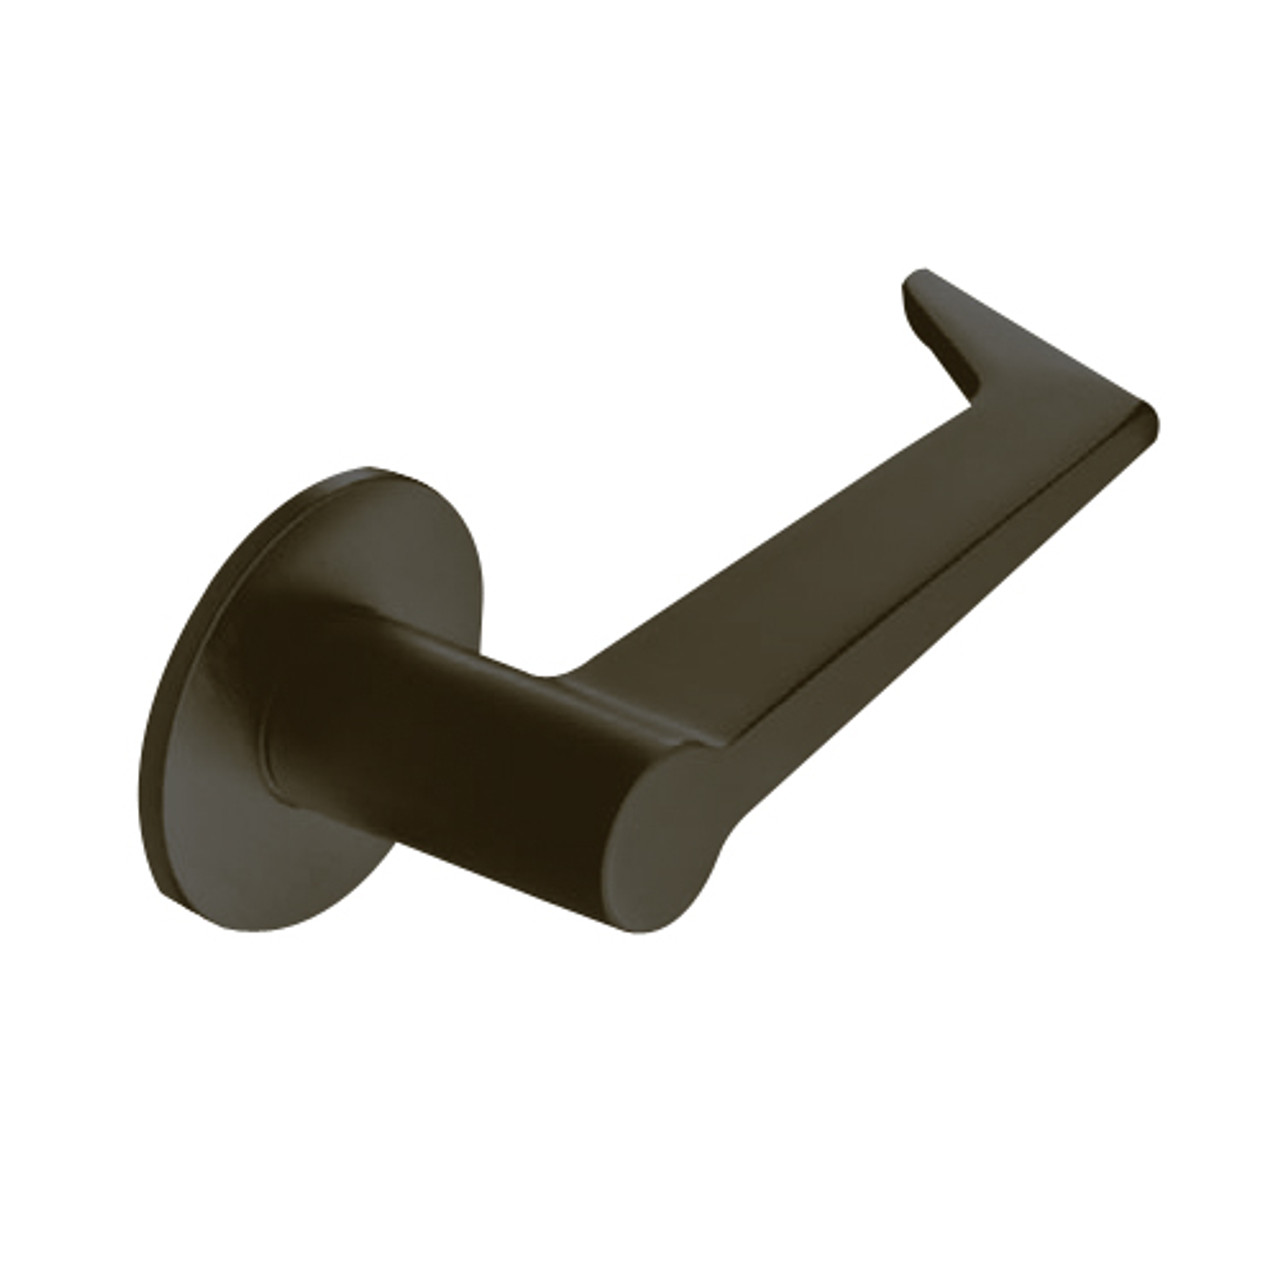 ML2048-ESB-613-LC Corbin Russwin ML2000 Series Mortise Entrance Locksets with Essex Lever in Oil Rubbed Bronze